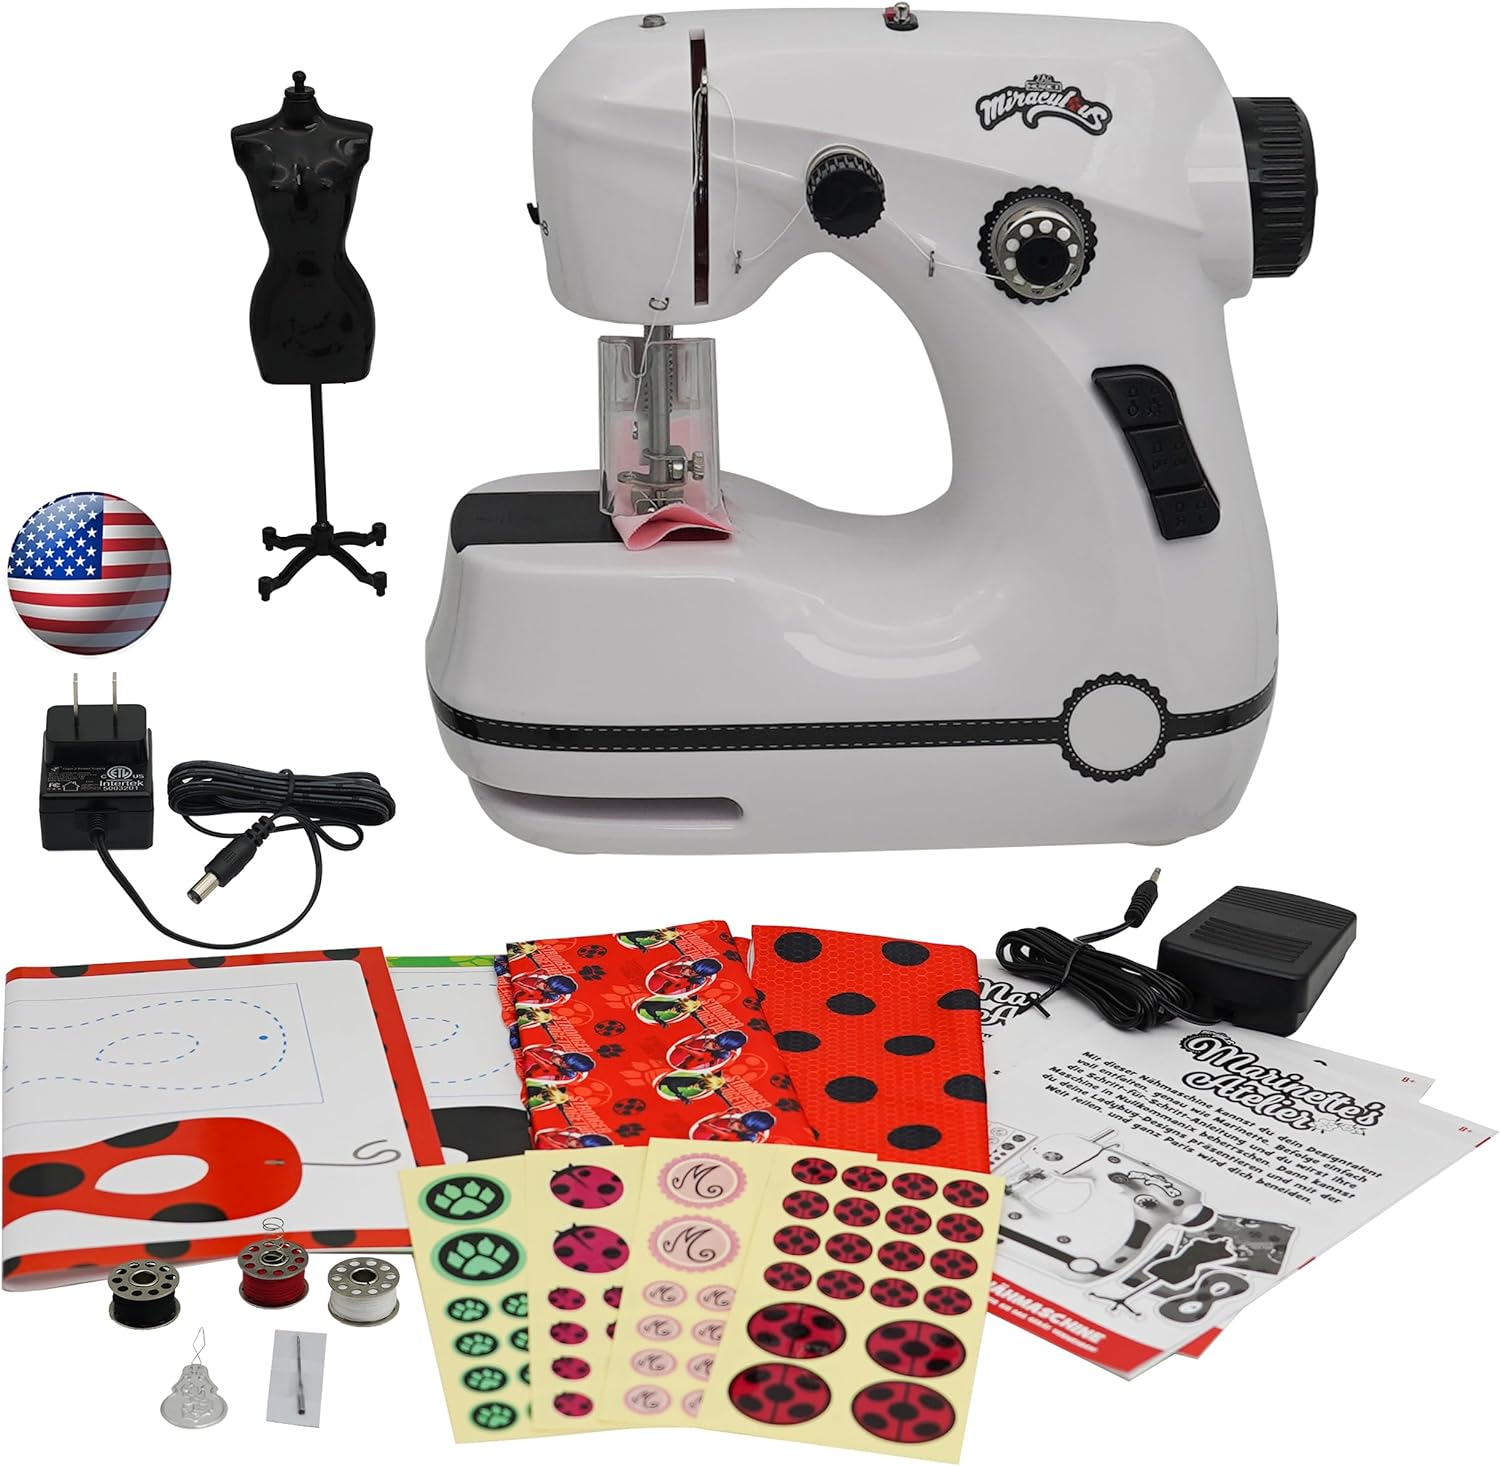 Miraculous Ladybug - Marinette's Mini Sewing Machine For Beginners And  Kids, Dual Speed Portable Machine with Miraculous Fabric, Black Mannequin,  Superhero Mask Cutouts, And Foot Pedal, Wyncor 